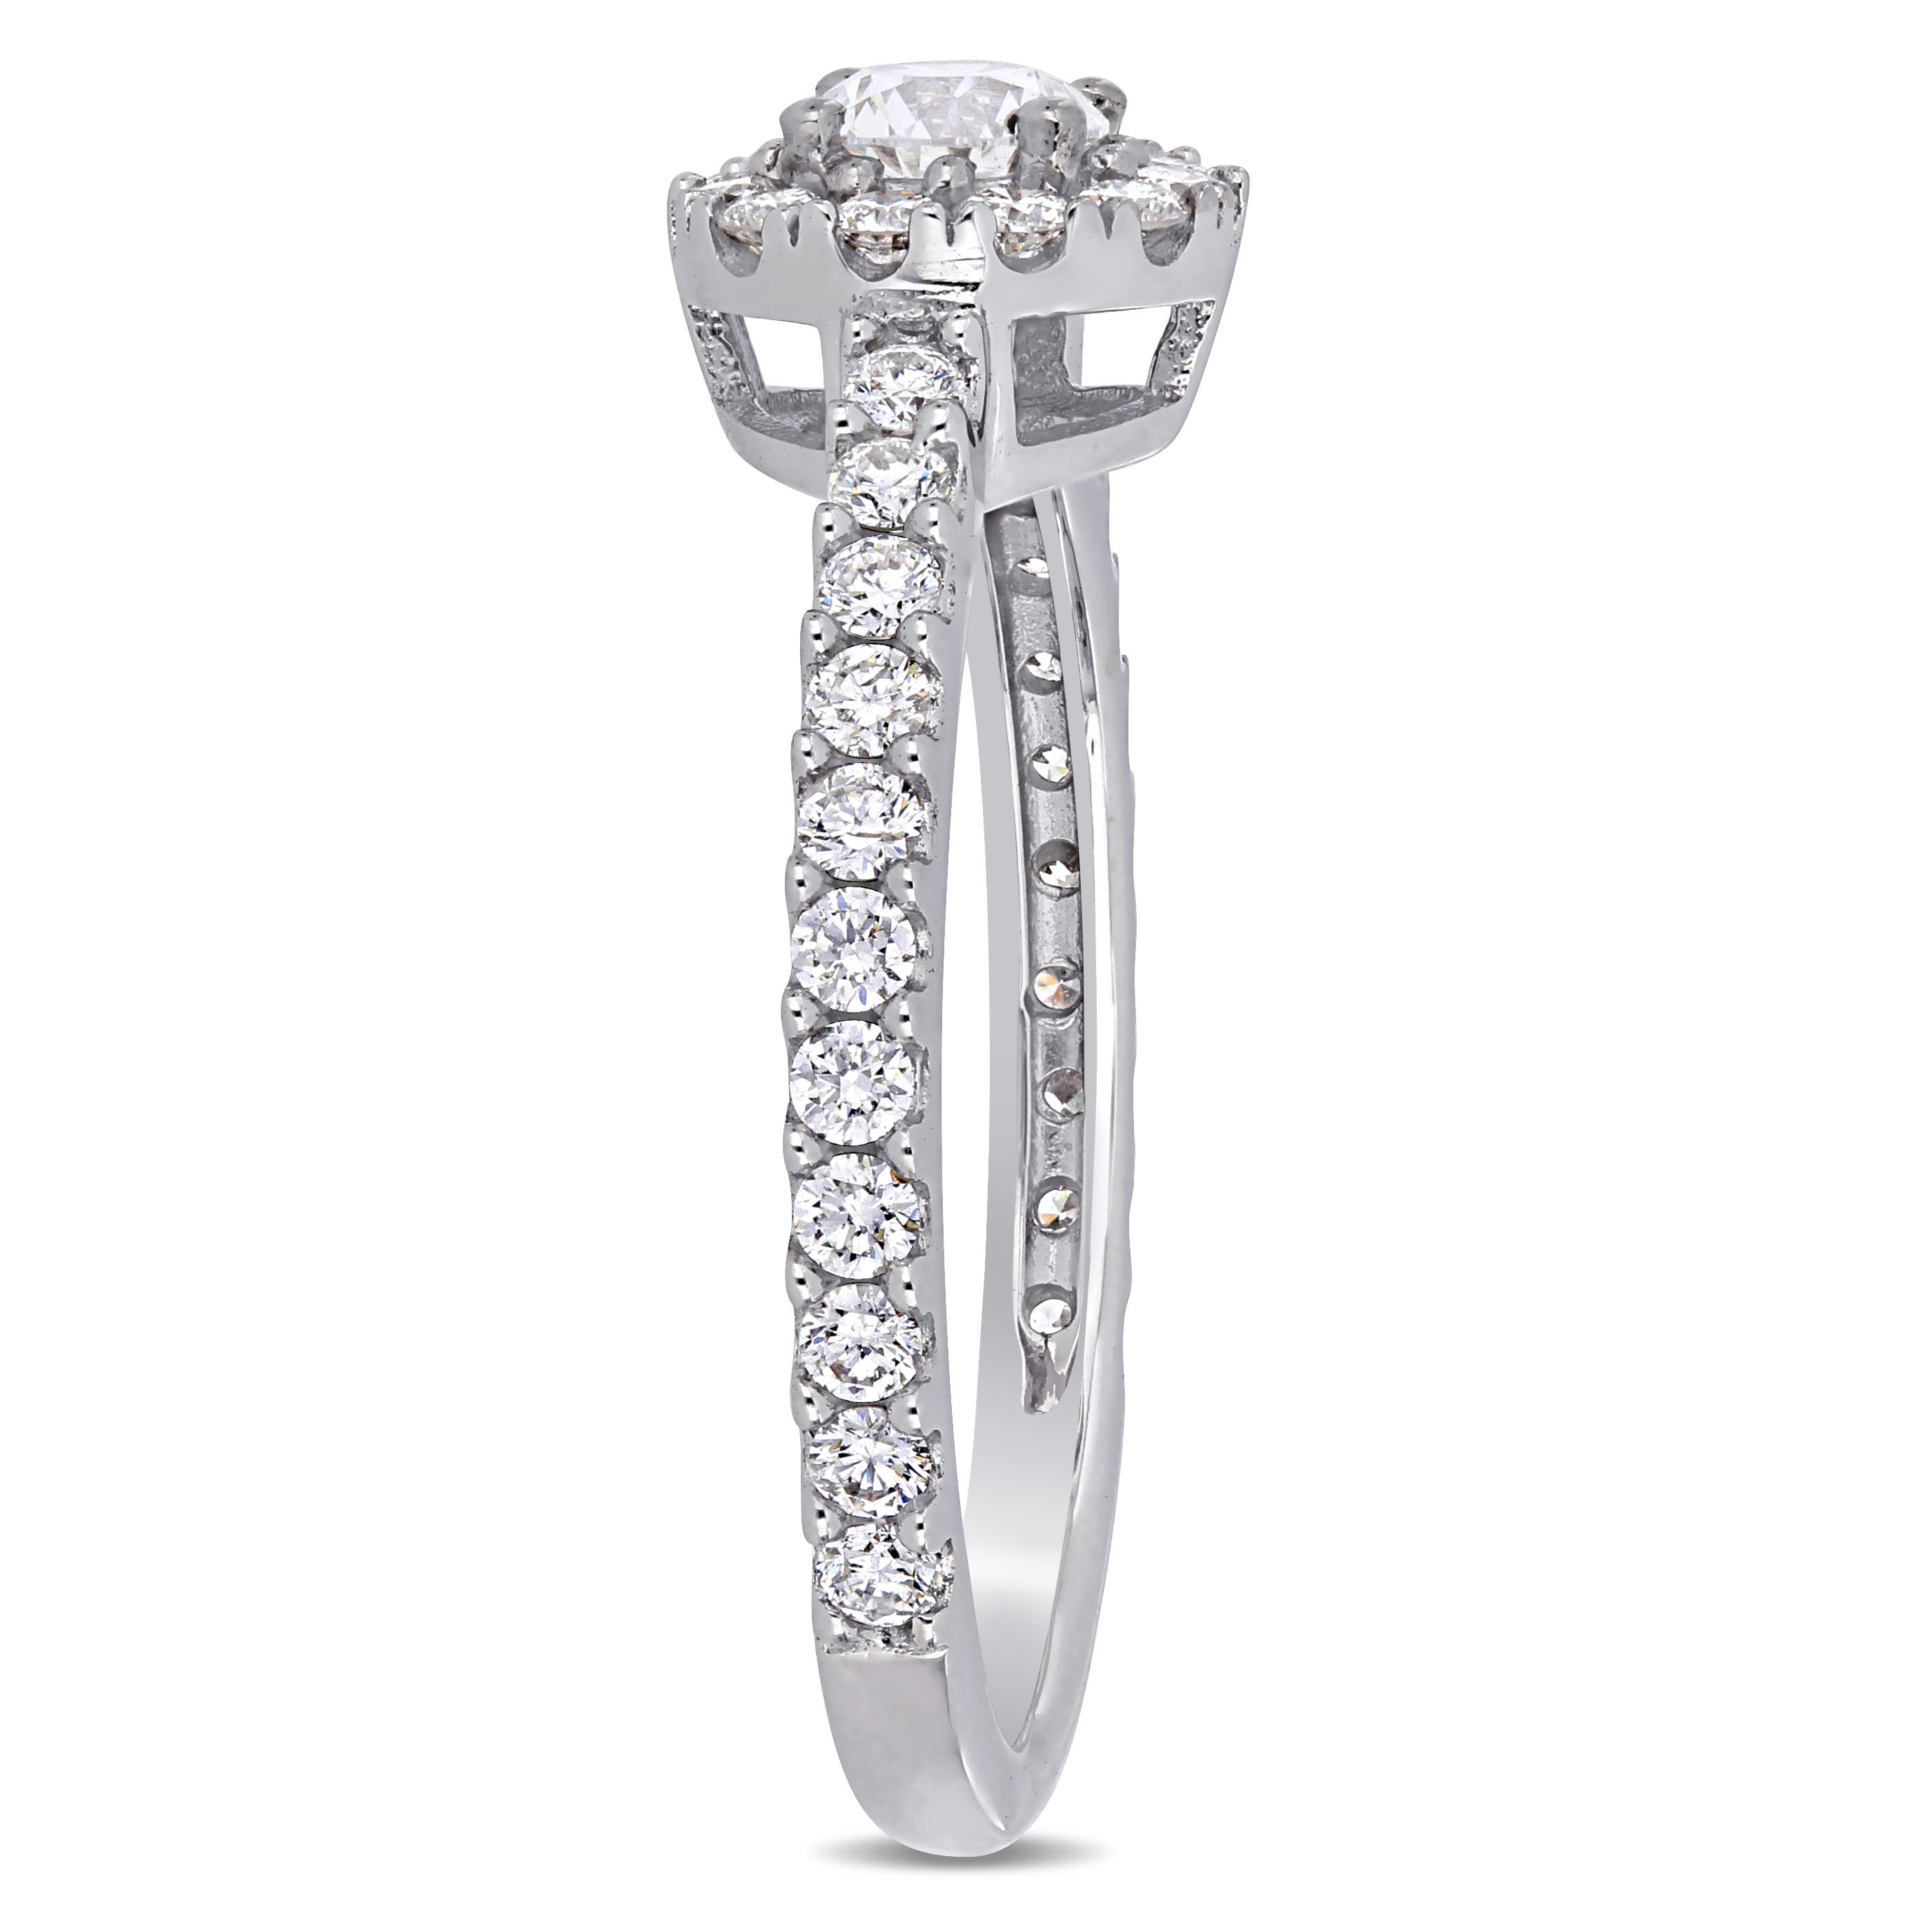 1 CT TW Round-Cut Diamond Halo Engagement Ring in 14k White Gold